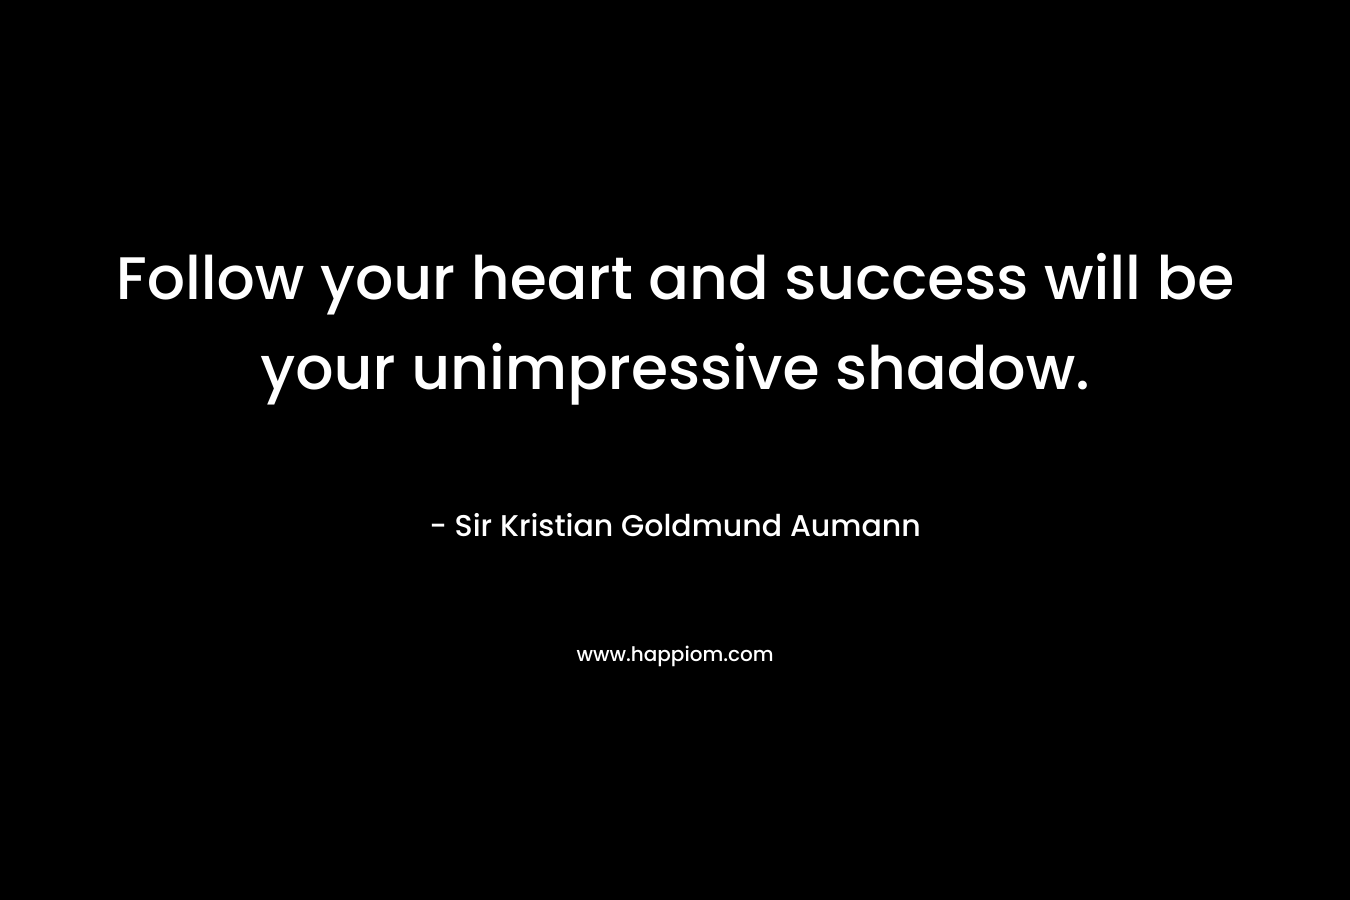 Follow your heart and success will be your unimpressive shadow.